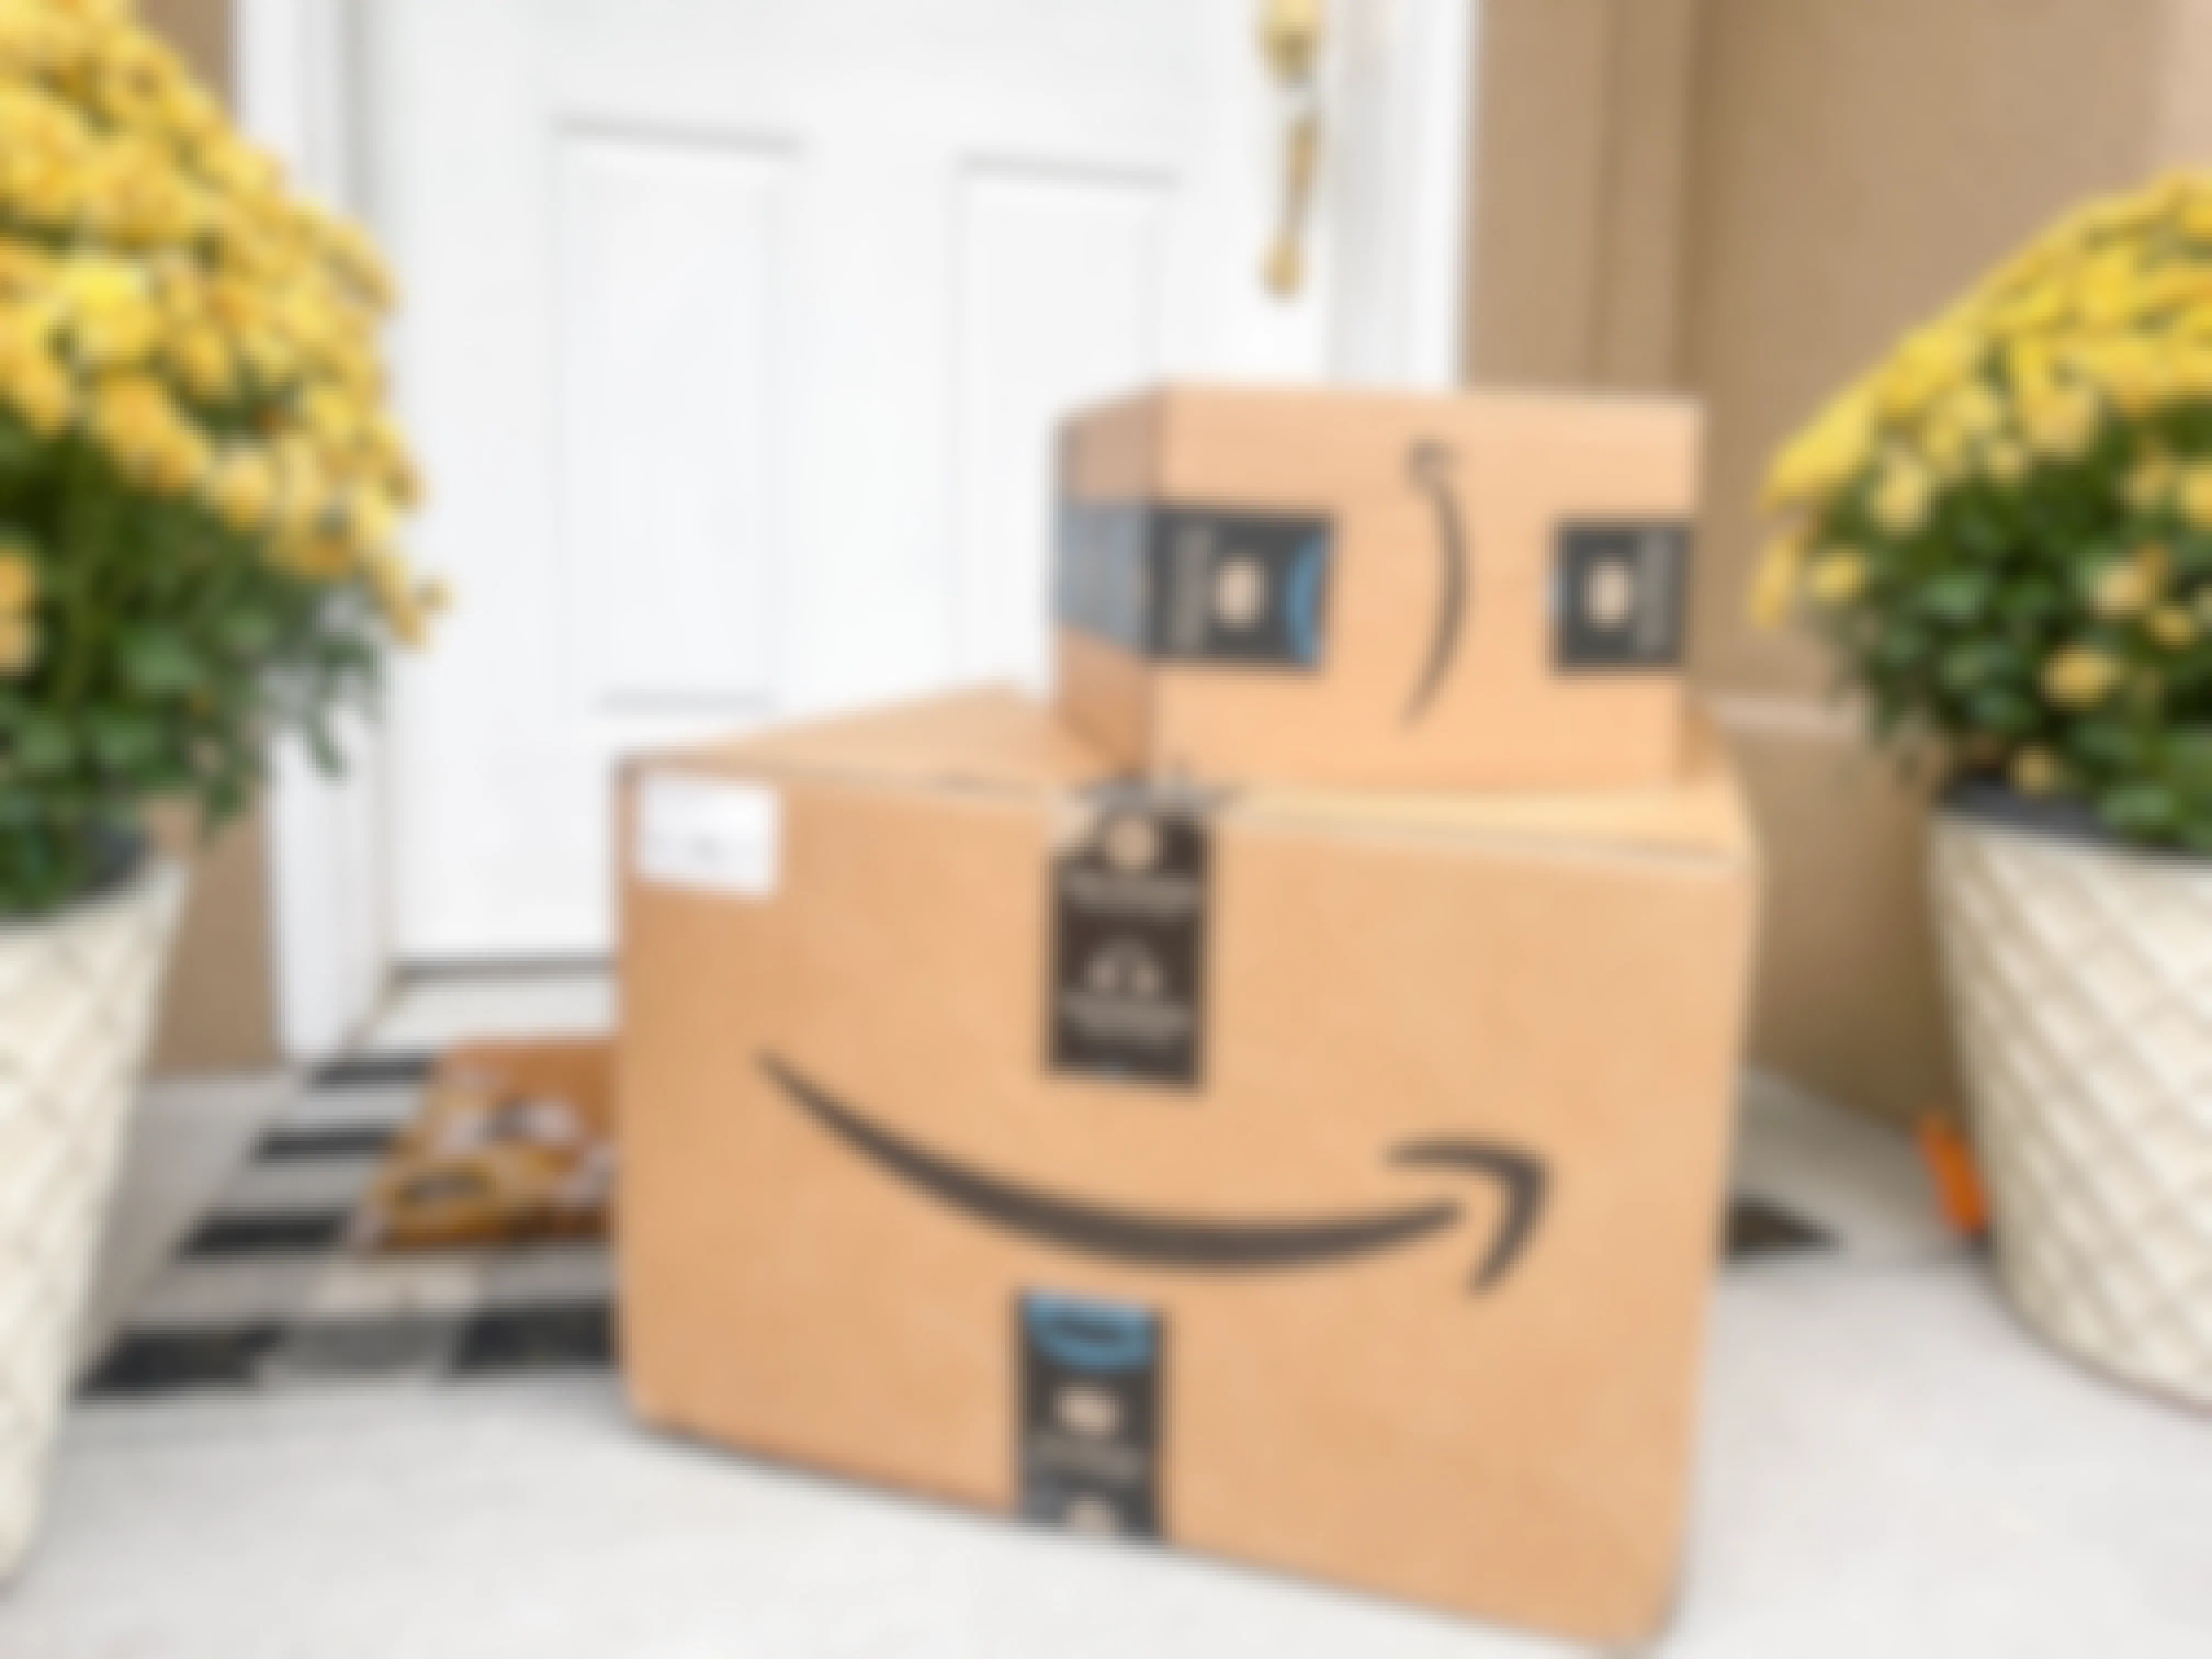 Amazon boxes on a doorstep with fall mums on each side